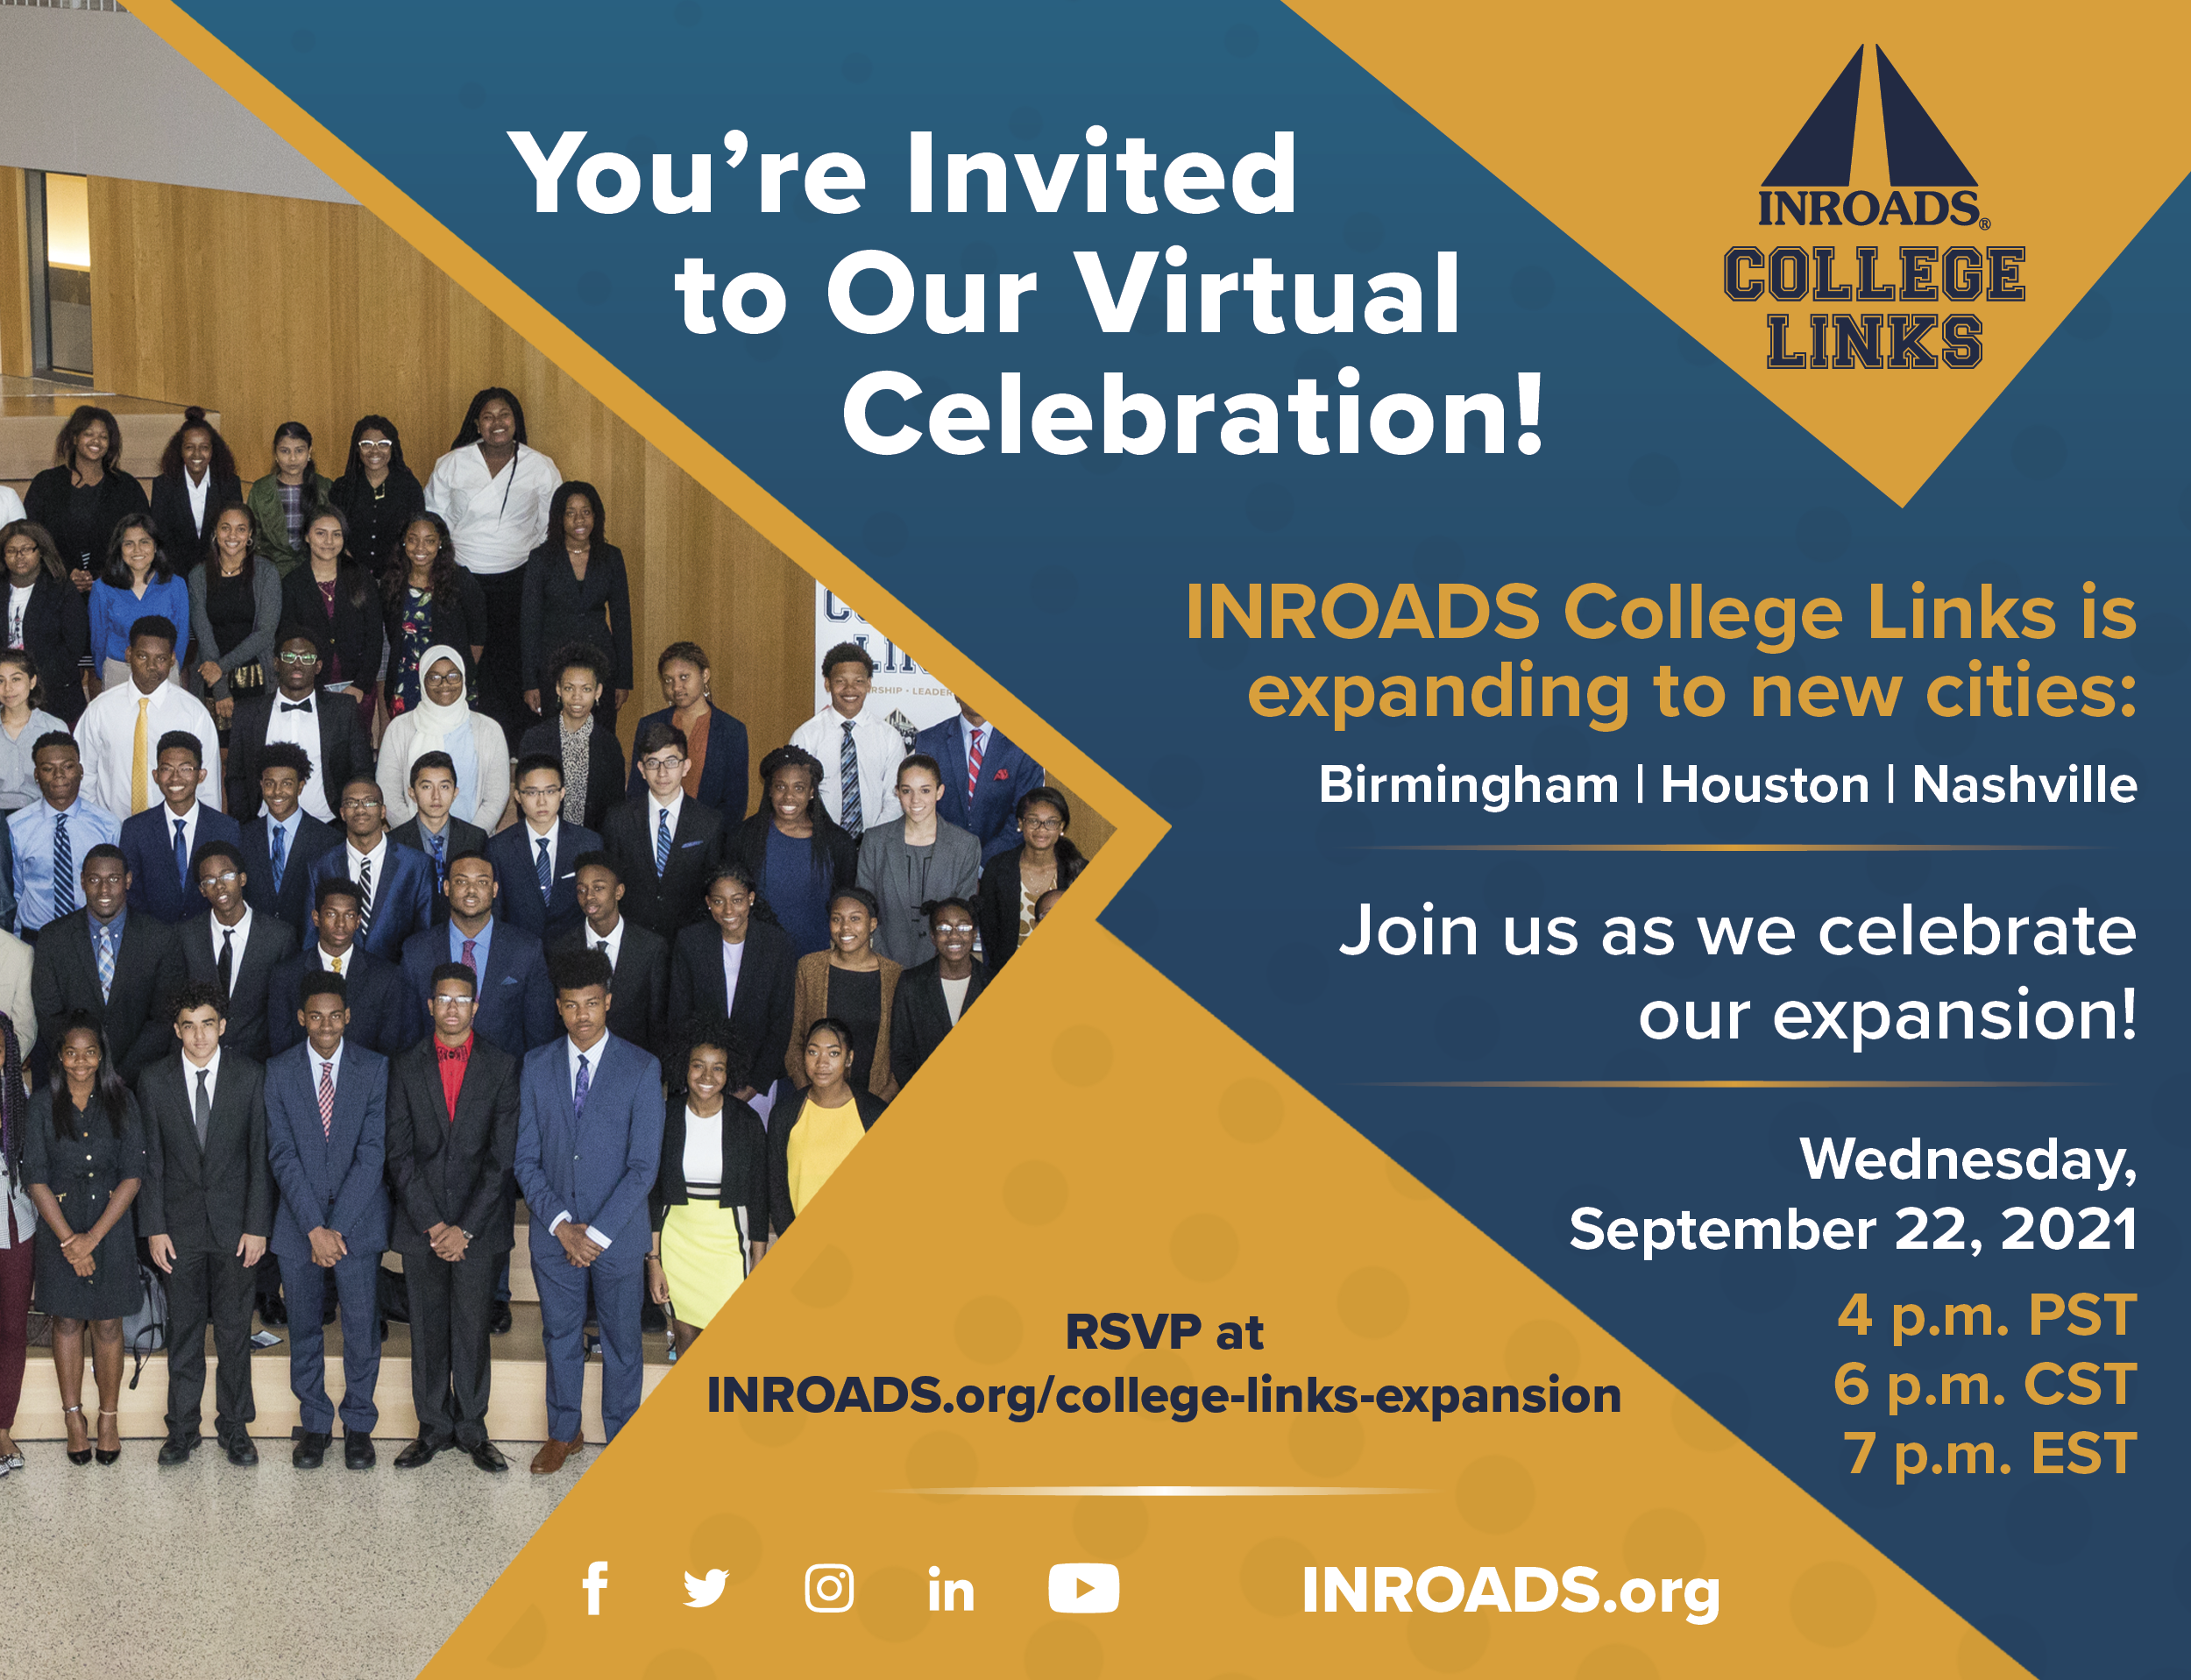 Featured image for “INROADS COLLEGE LINKS EXPANDS ITS REACH AND  IMPACT TO MORE U.S. CITIES”